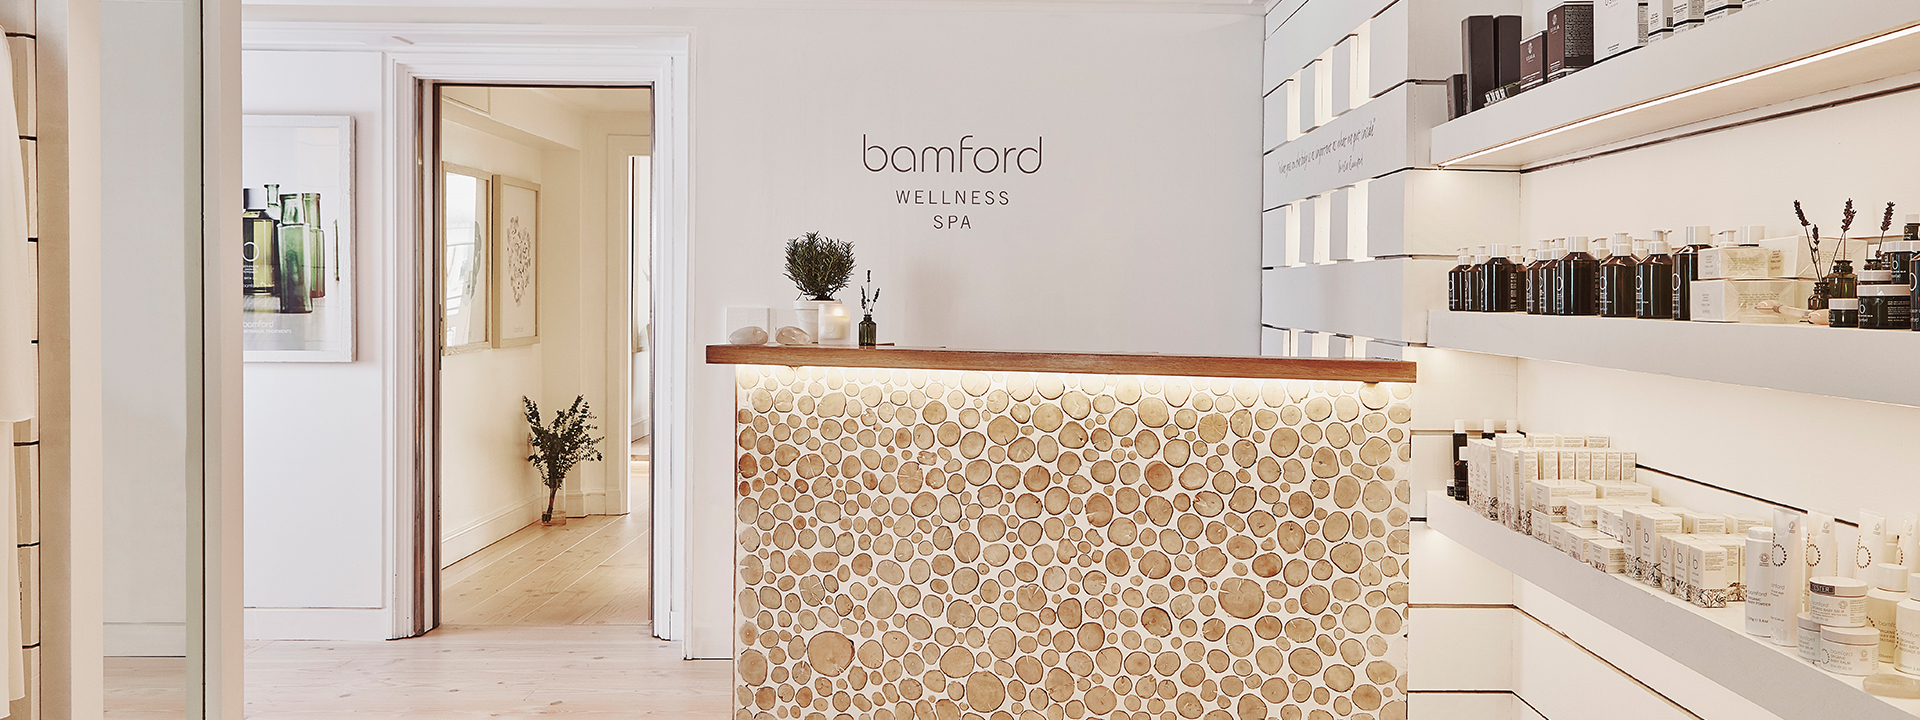 The Bamford Spa at The Berkeley - view of the counter at the entrance of the spa